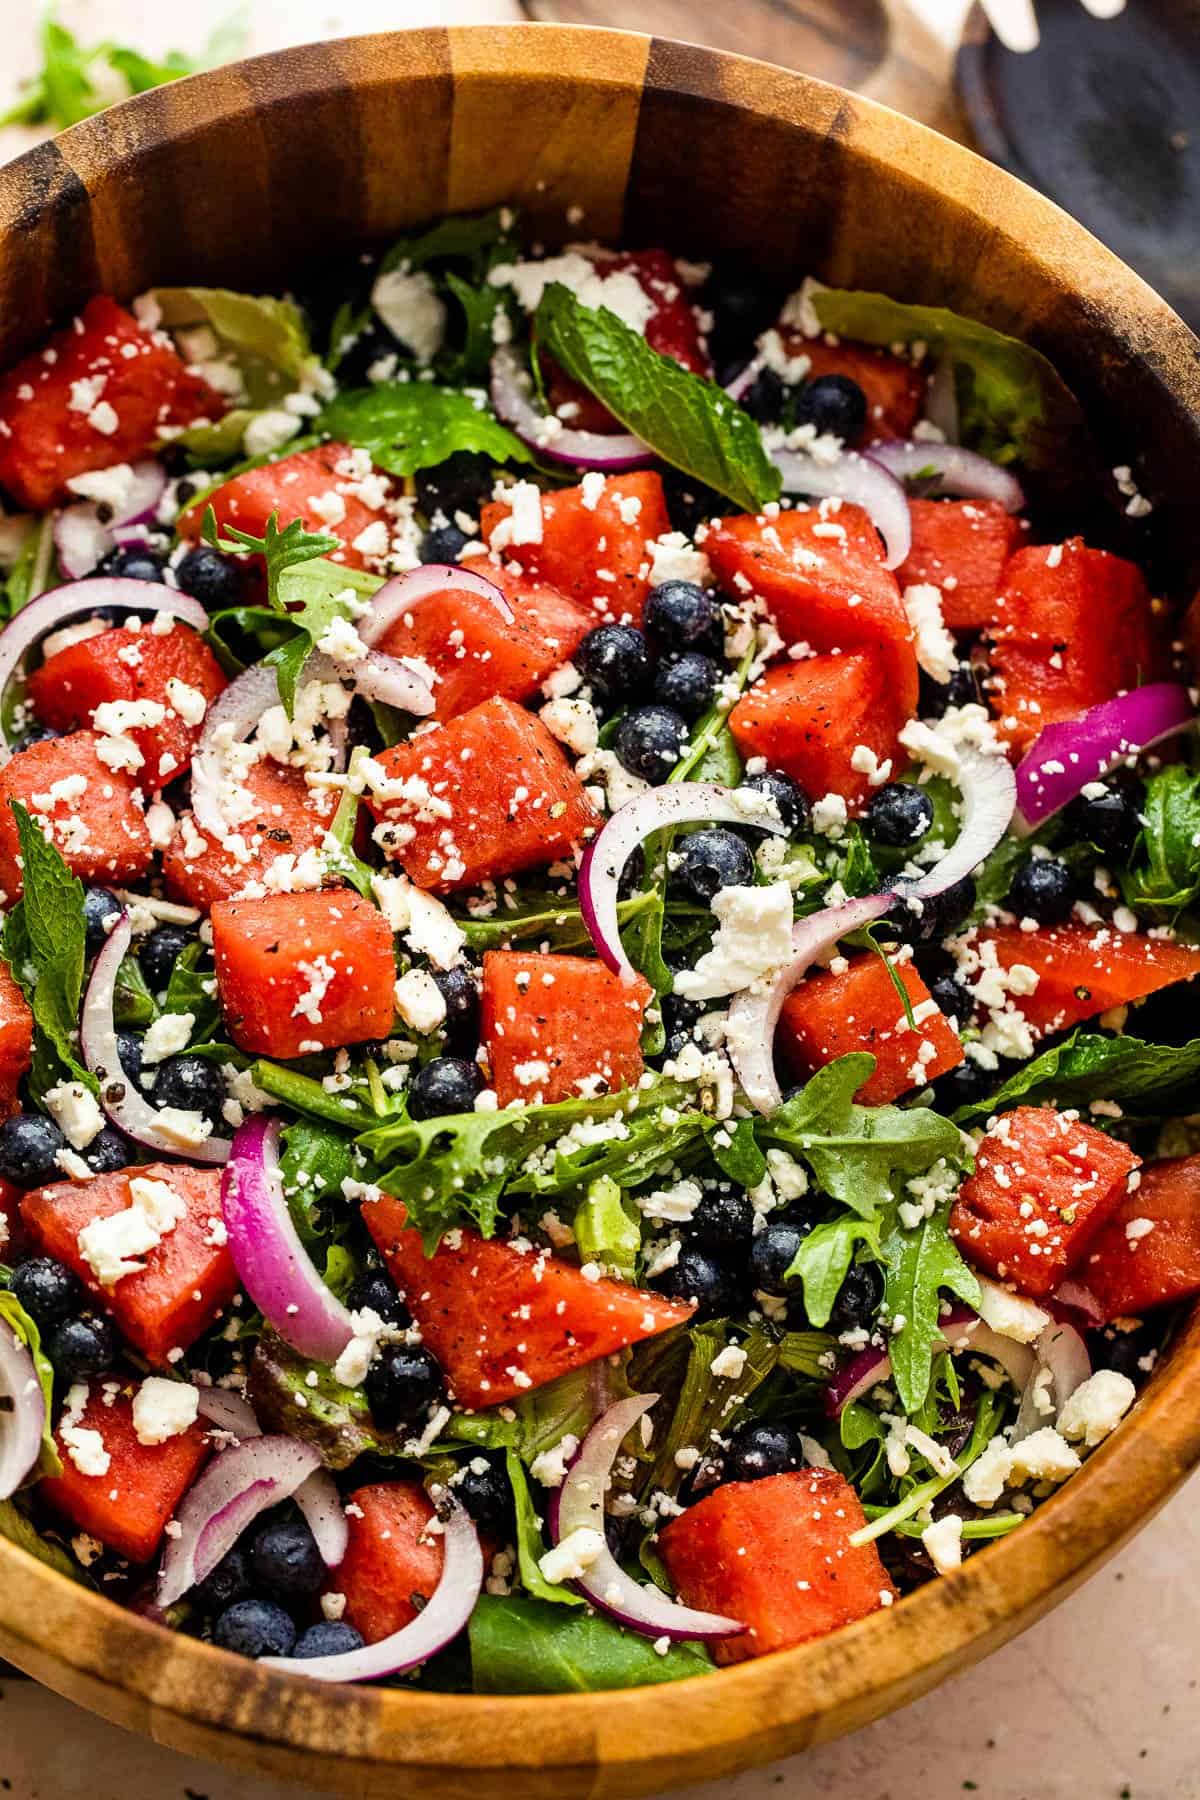 wooden salad bowl with cubed watermelon, blueberries, and sliced red onions atop a bed of torn up lettuce greens and topped with feta cheese crumbles